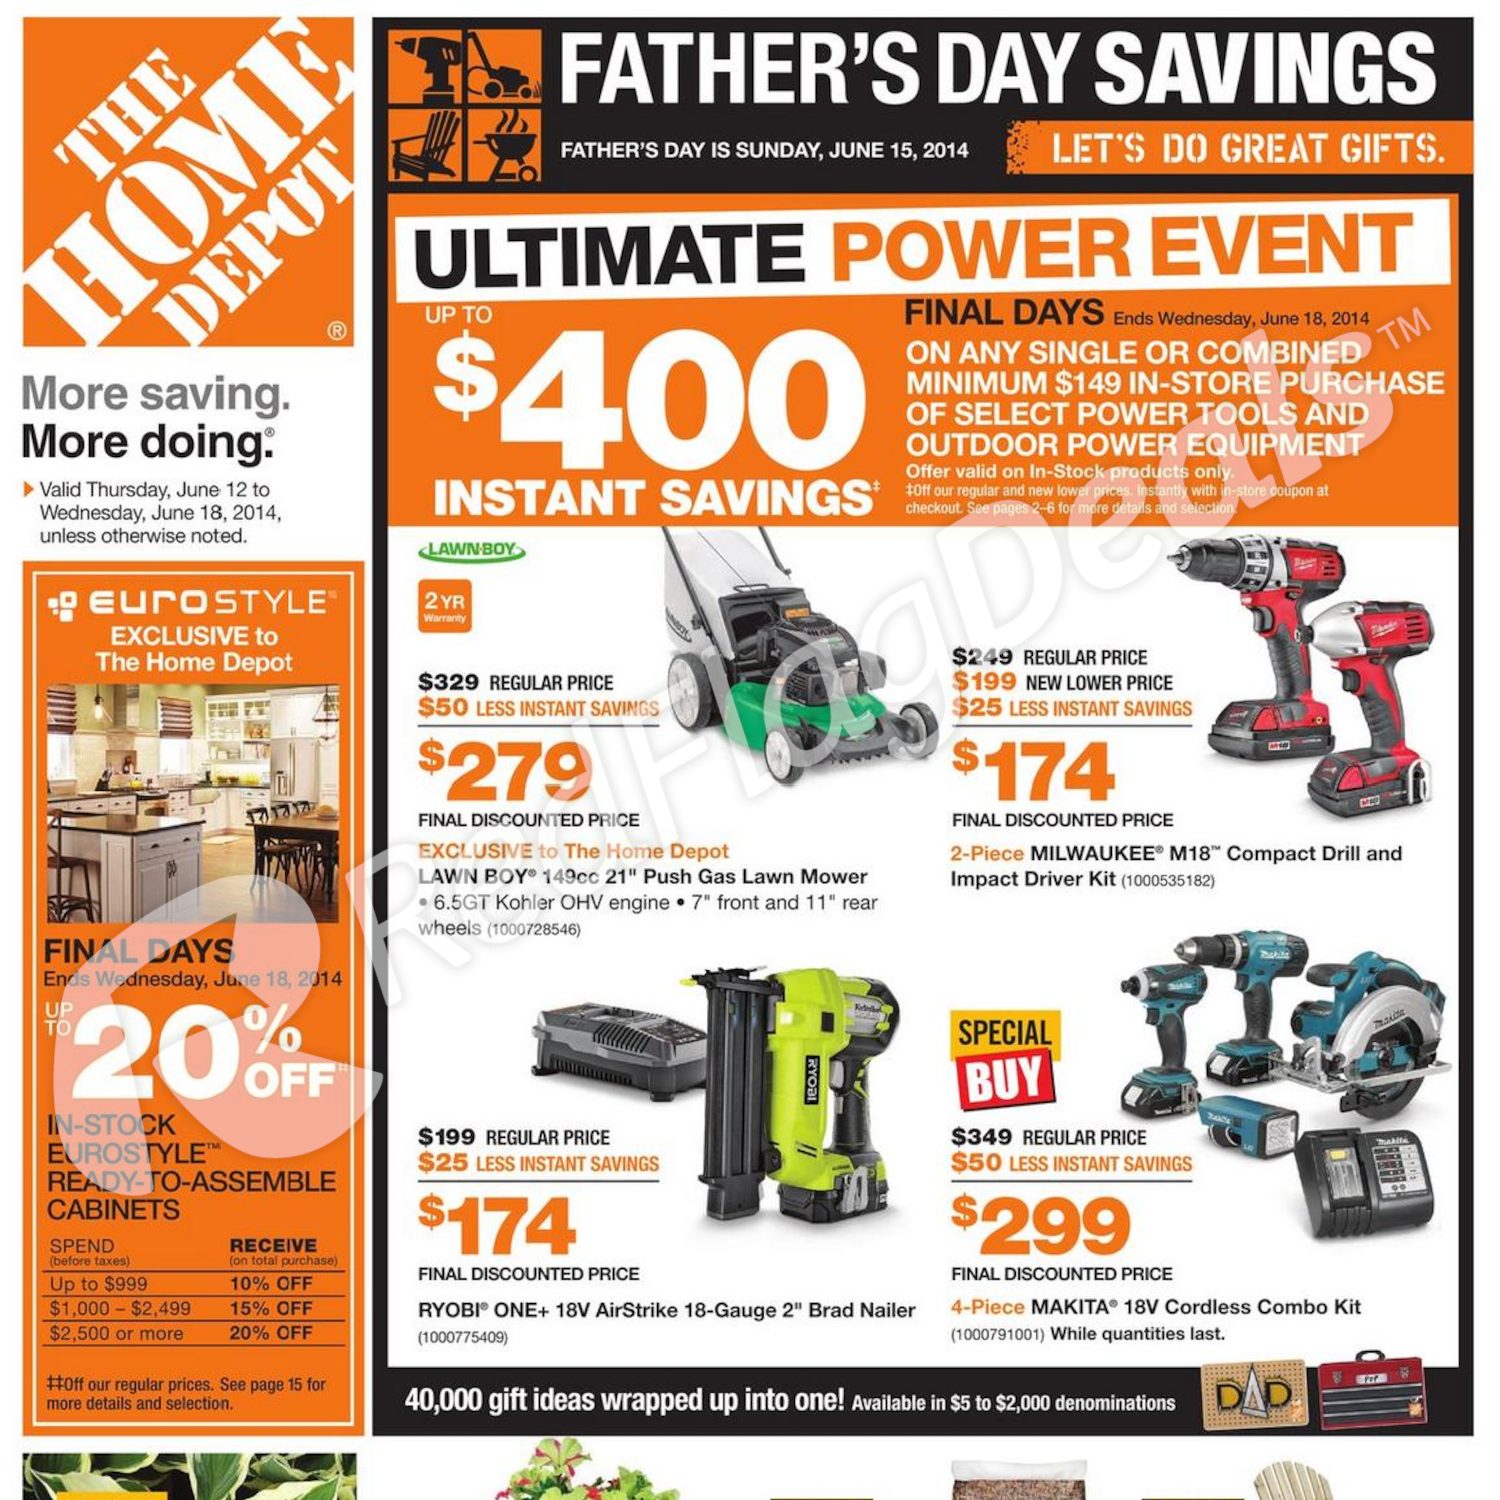 Father S Day Specials At Home Depot Online Not only that, but stores will also be operating at normal business hours so there's no need to rush. father s day specials at home depot